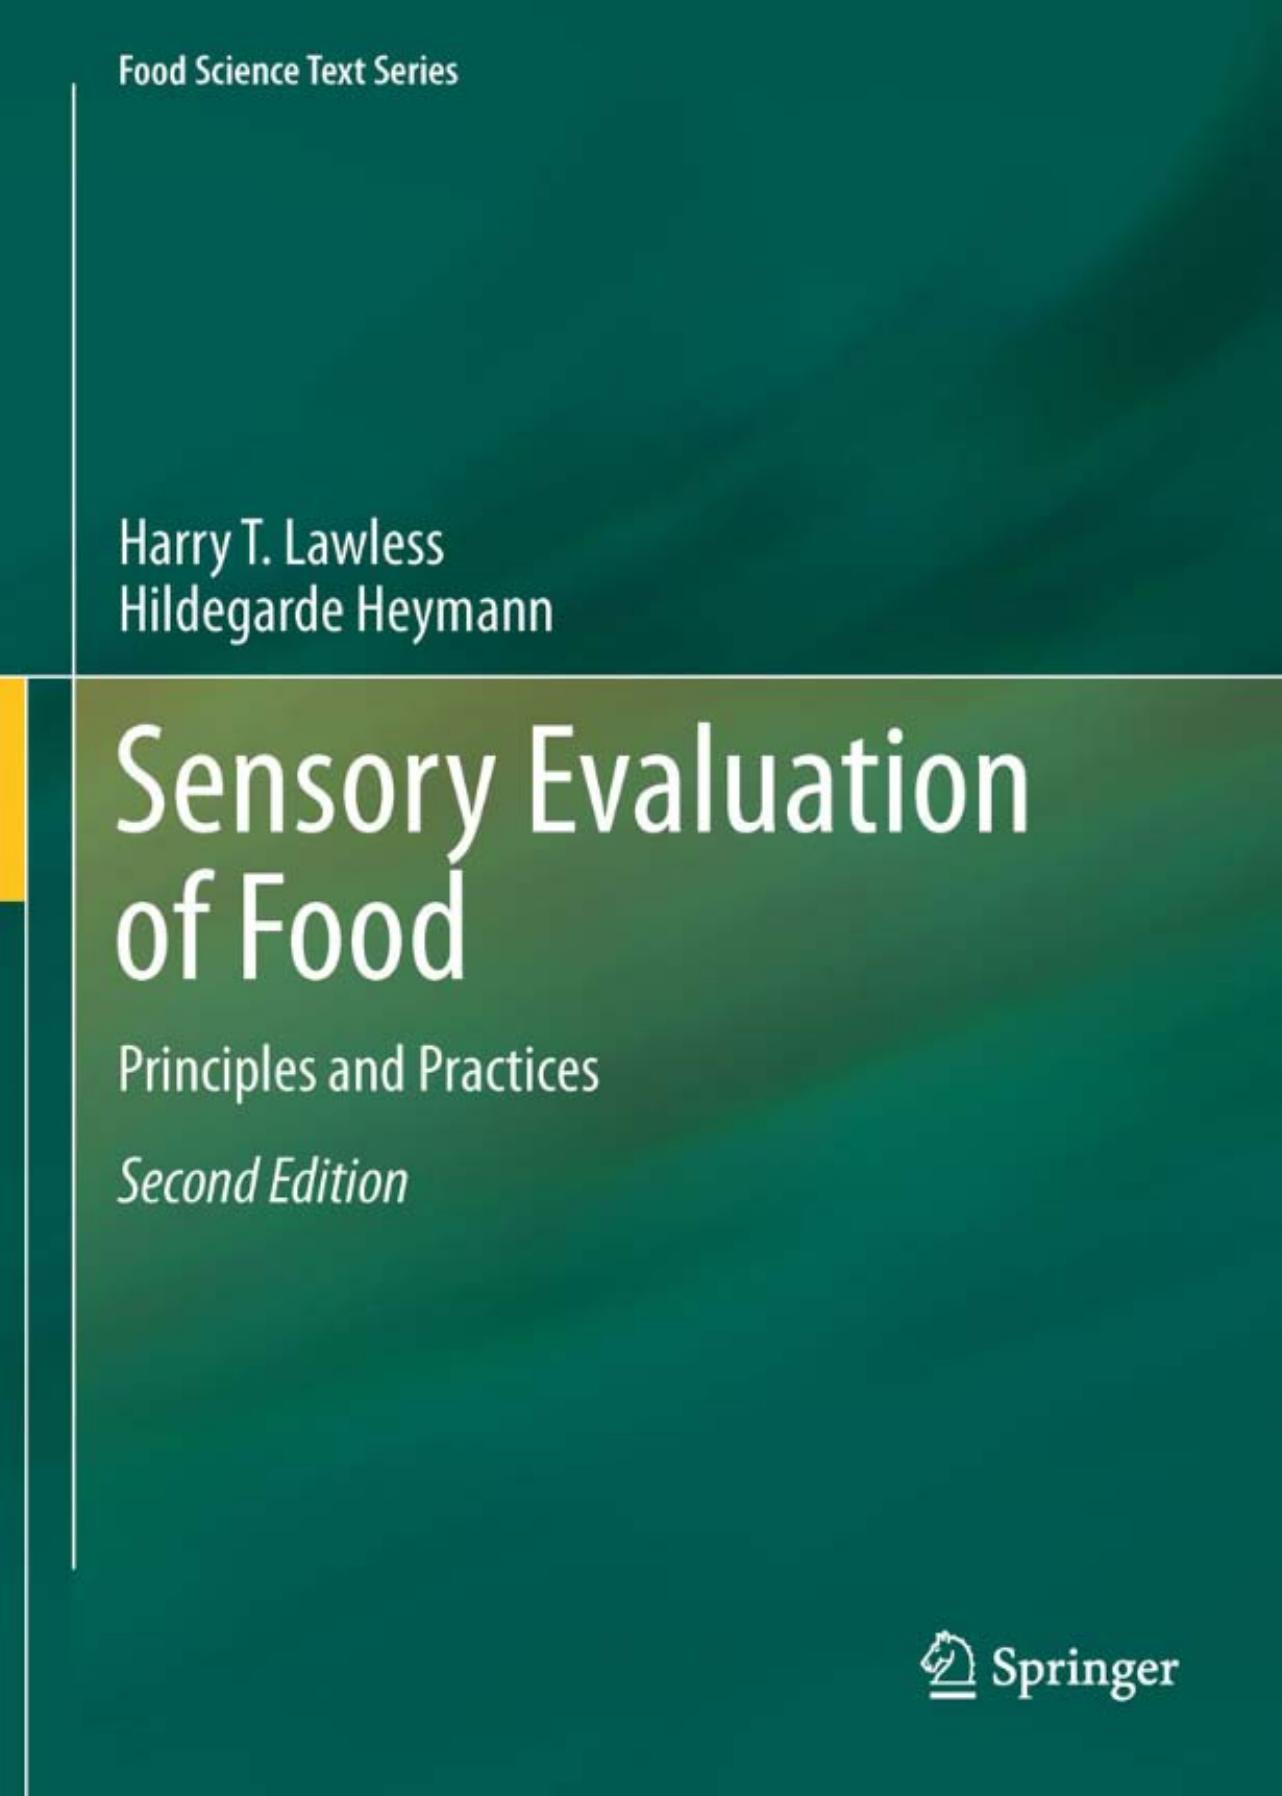 Sensory Evaluation of Food: Principles and Practices, Second Edition (Food Science Text Series)